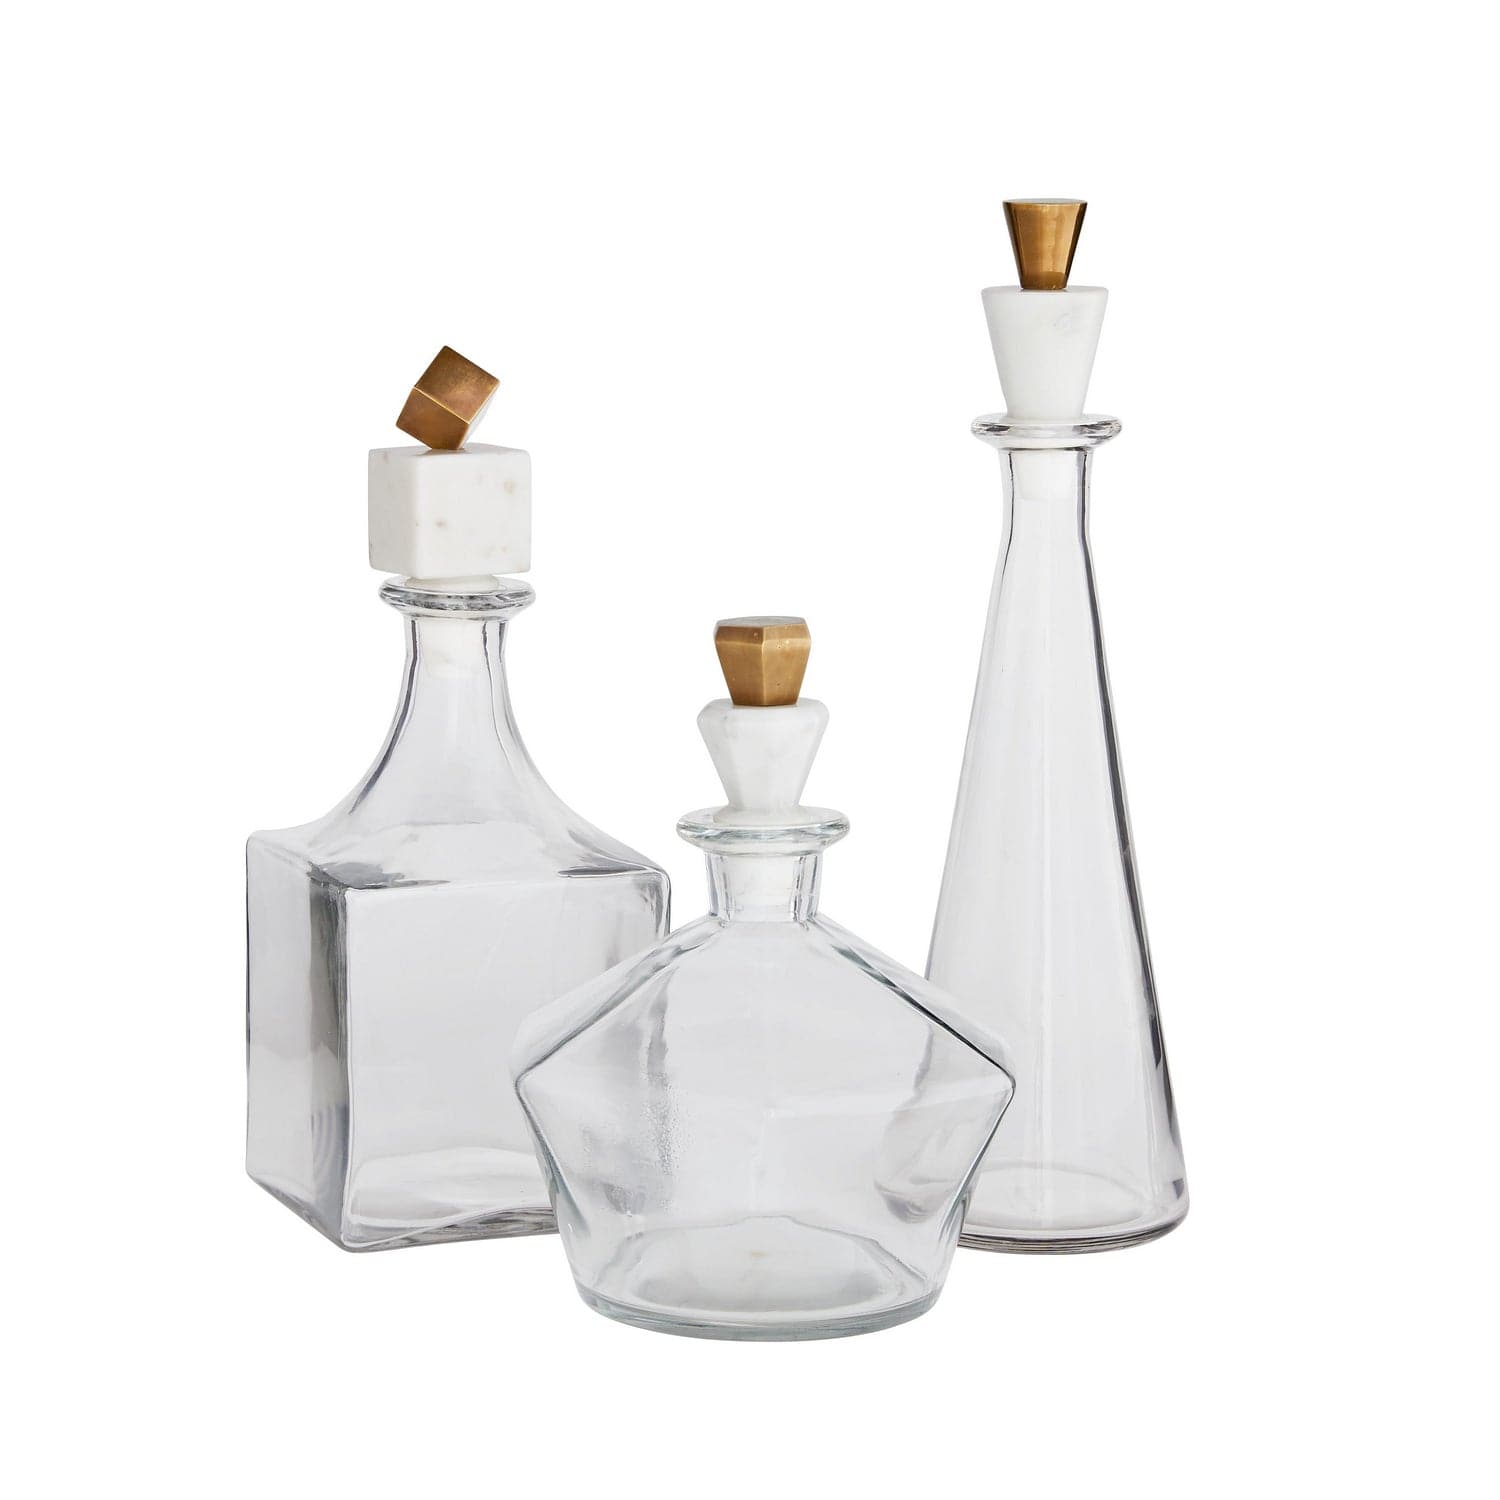 Arteriors - 6793 - Decanters Set of 3 - Wilshire - Clear